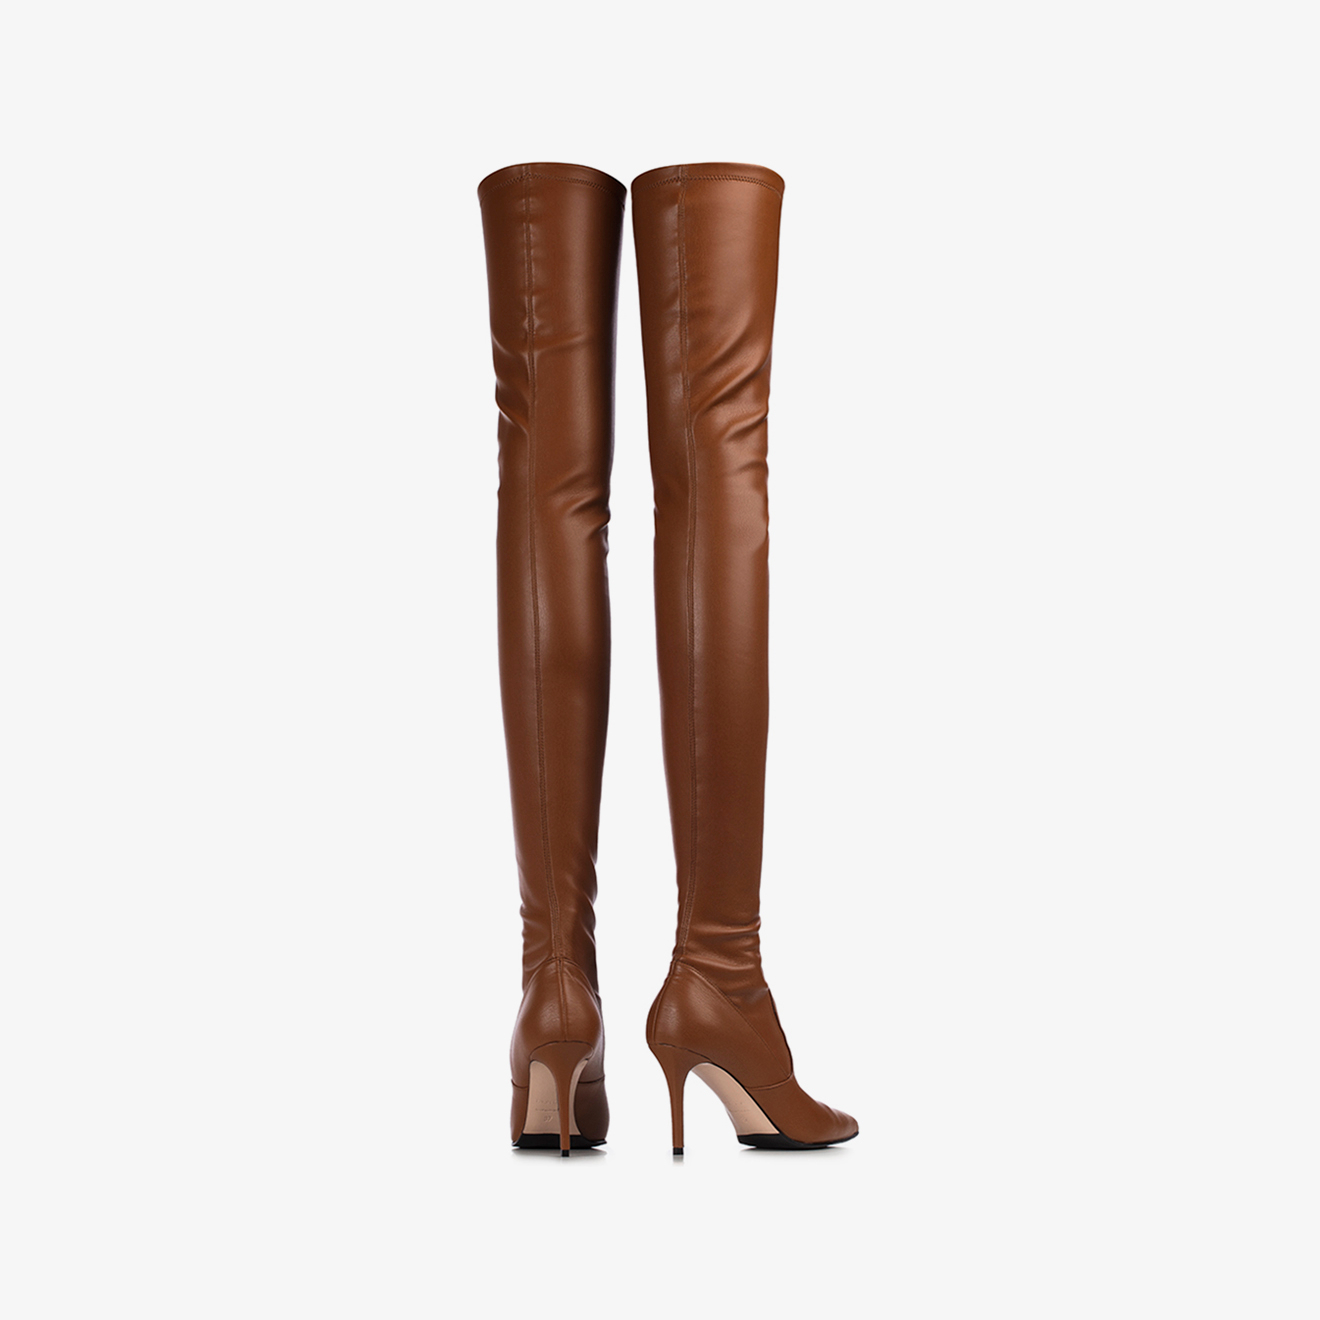 EVA THIGH-HIGH BOOT 90 mm - Le Silla | Official Online Store